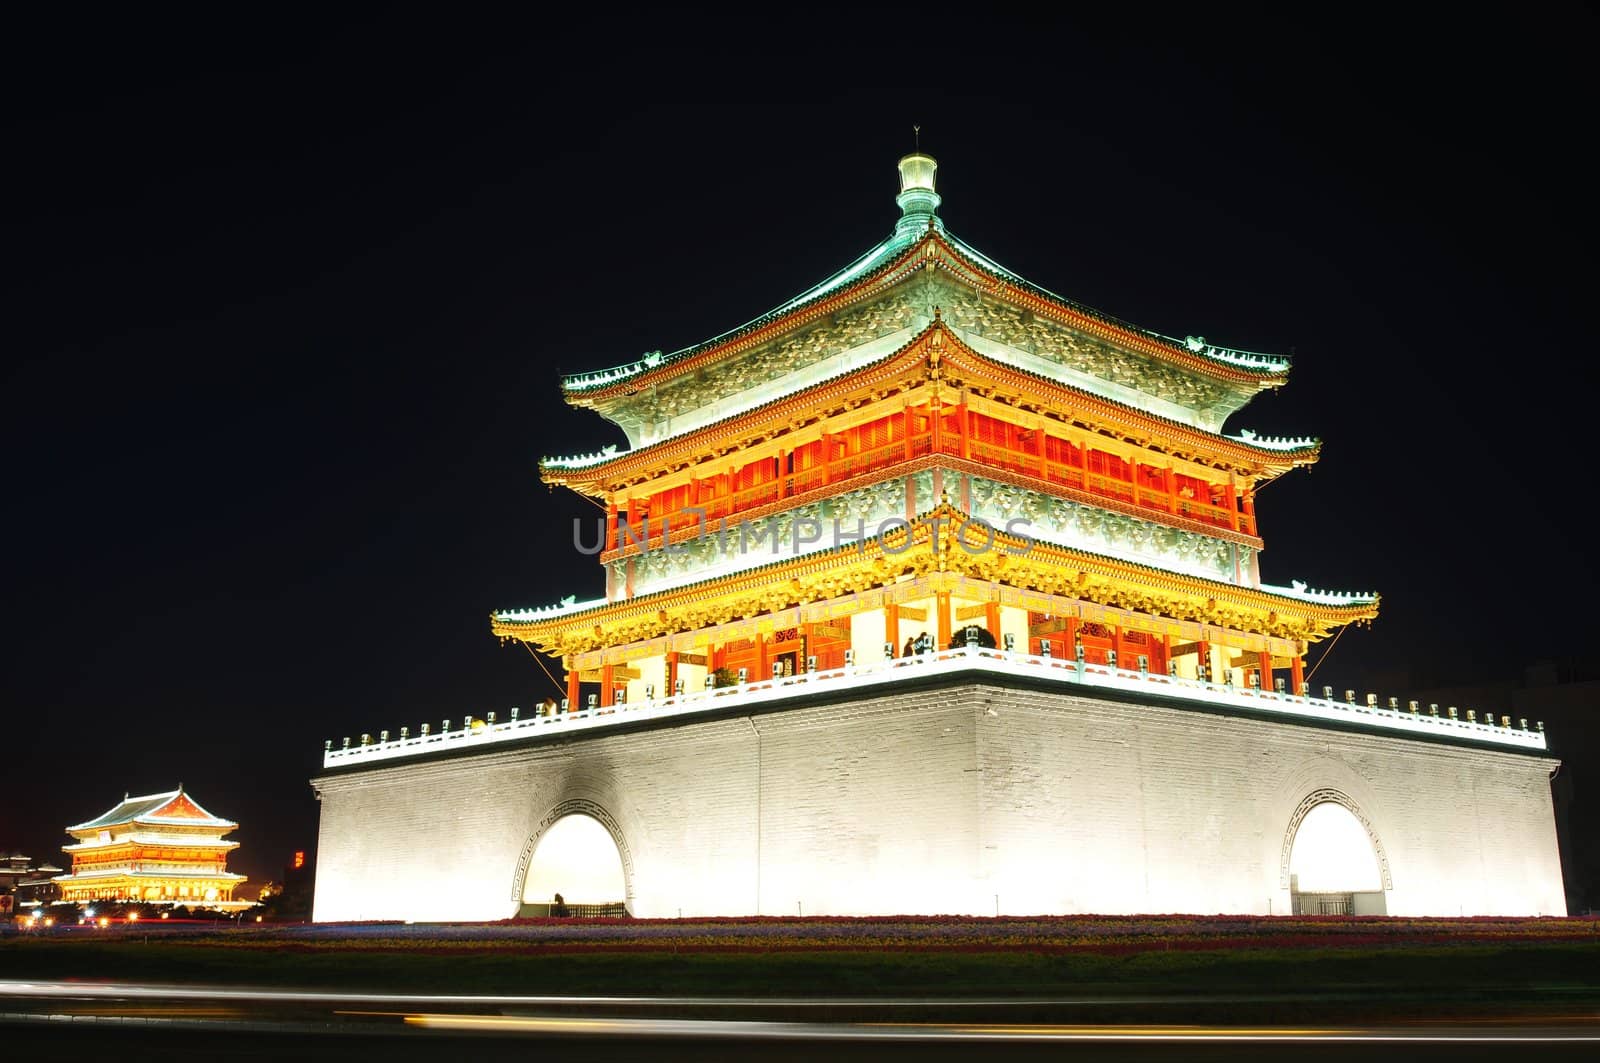 Night view of the famous landmark of Bell Tower in Xian, China